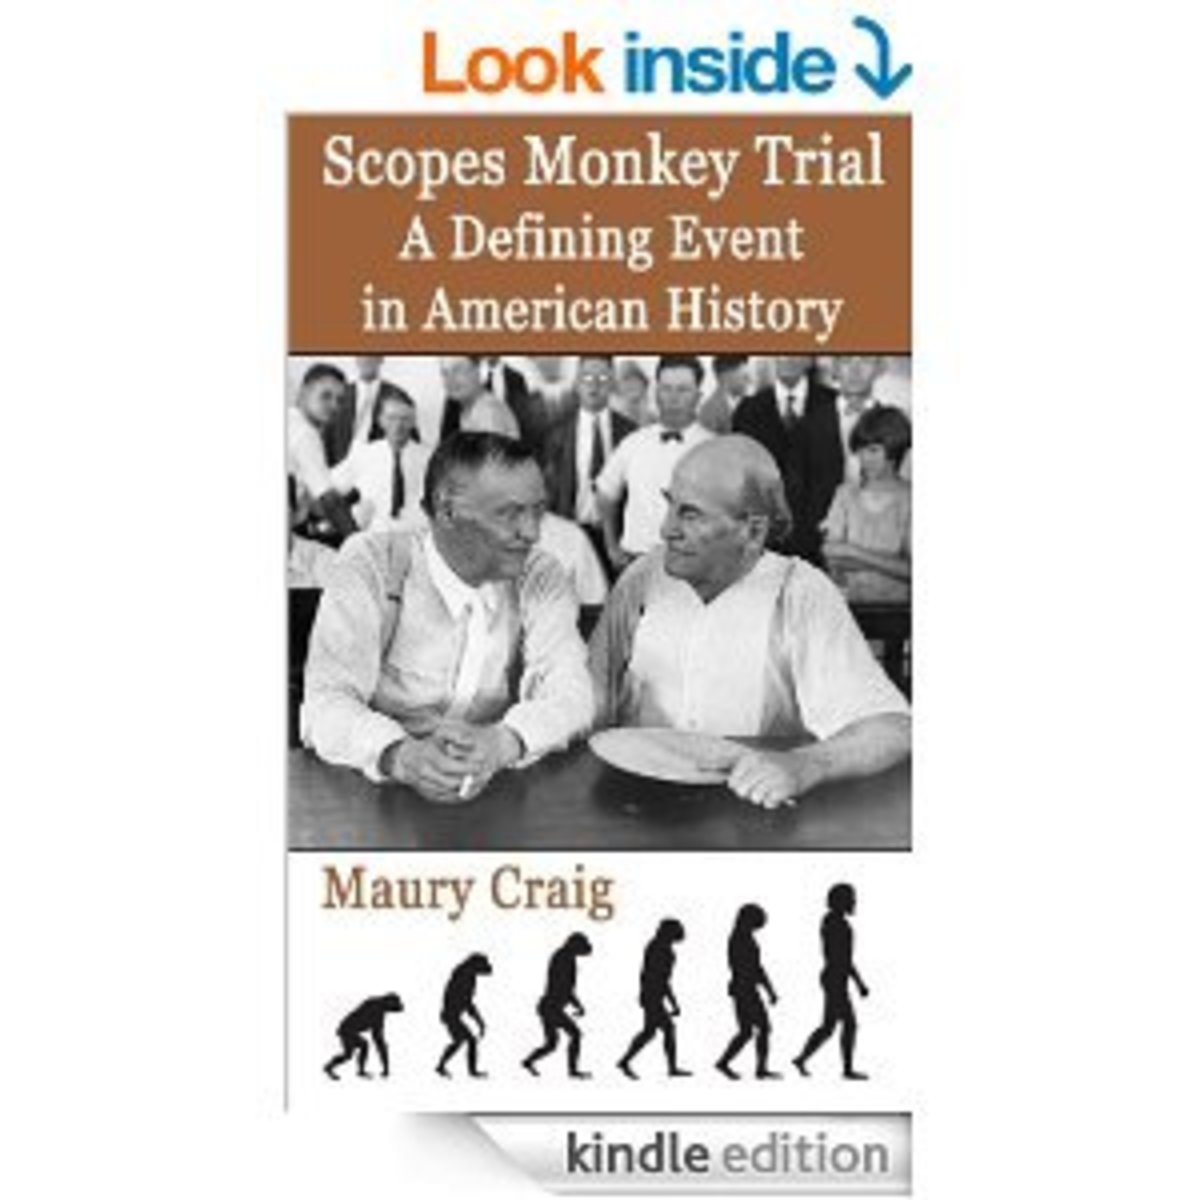 Scopes Monkey Trial: A Defining Event in American History